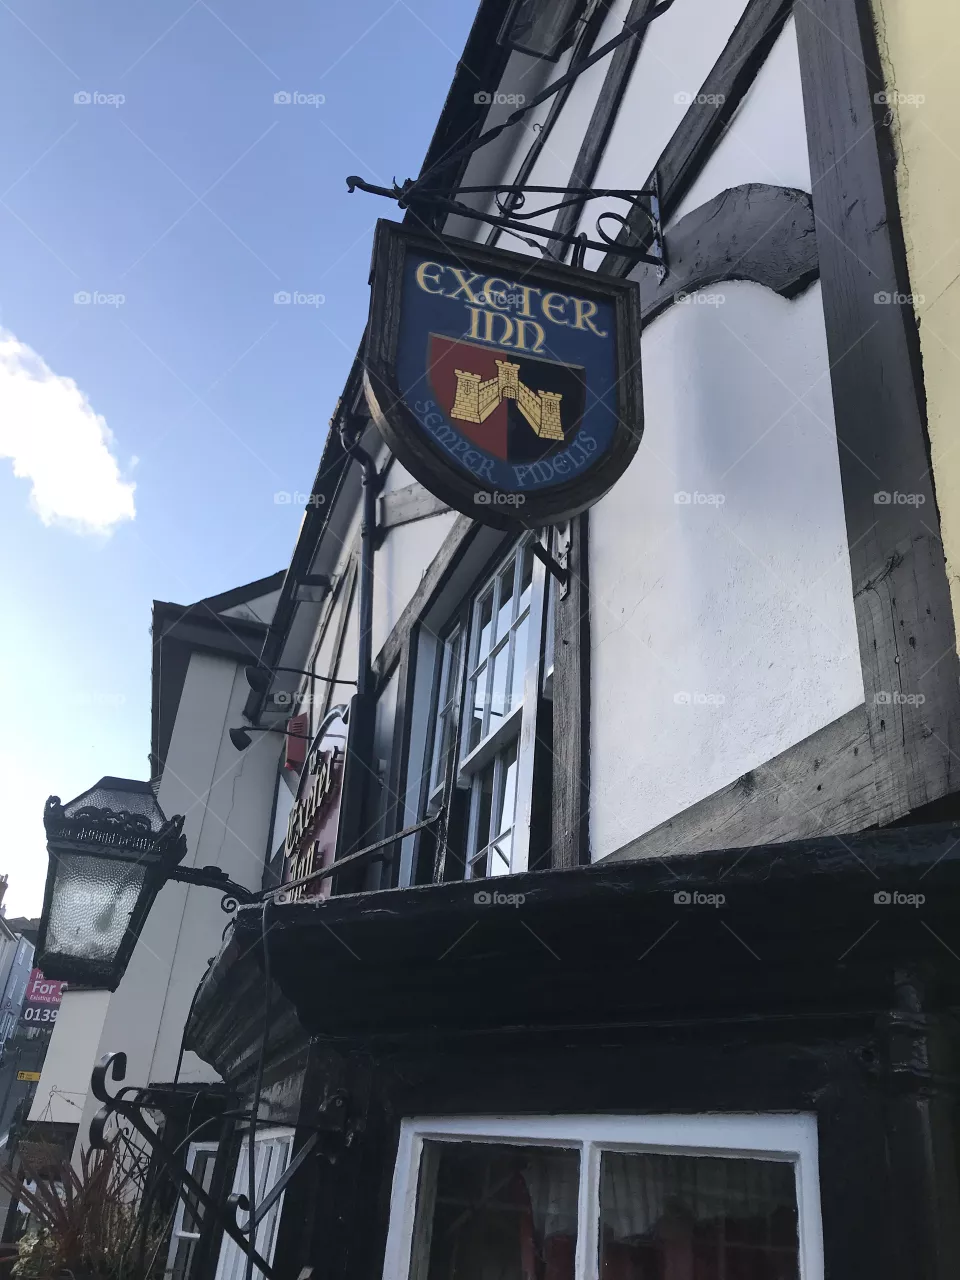 Another great pub sign for the Exeter Inn, Modbury, Devon